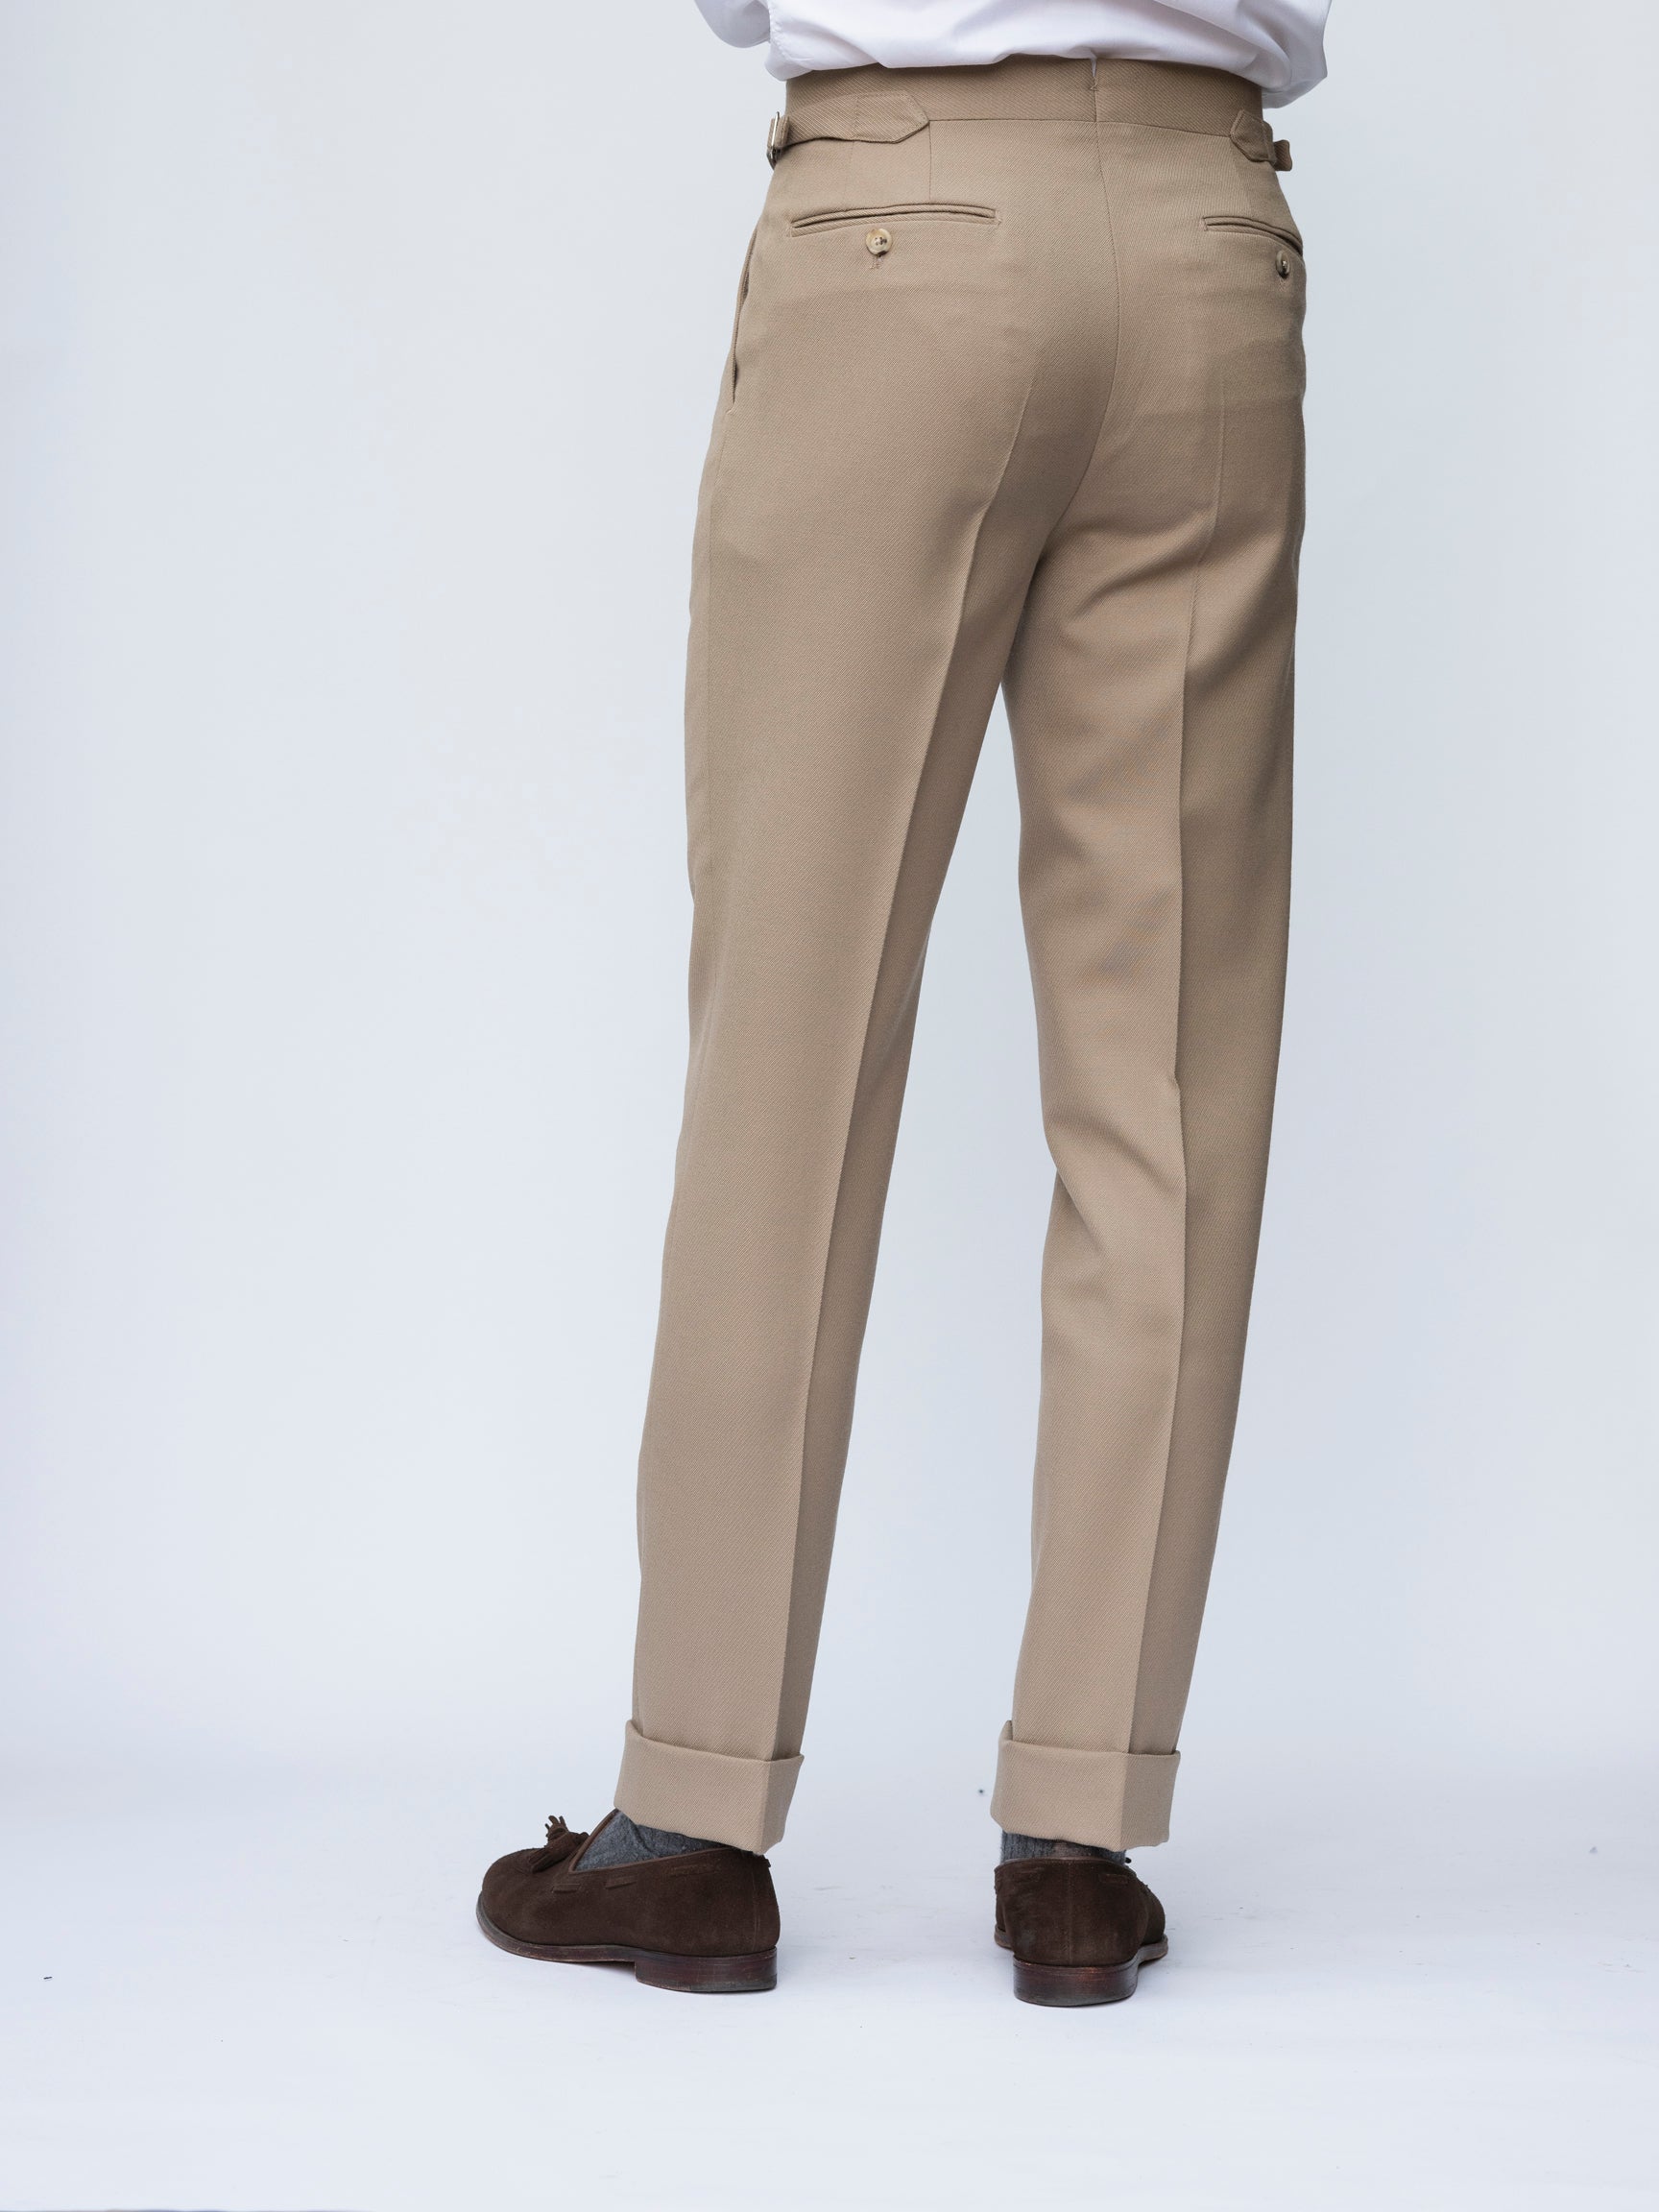 Brooks Brothers Own Make Cavalry Twill Trousers | Trousers, Corduroy dress,  Dress trousers